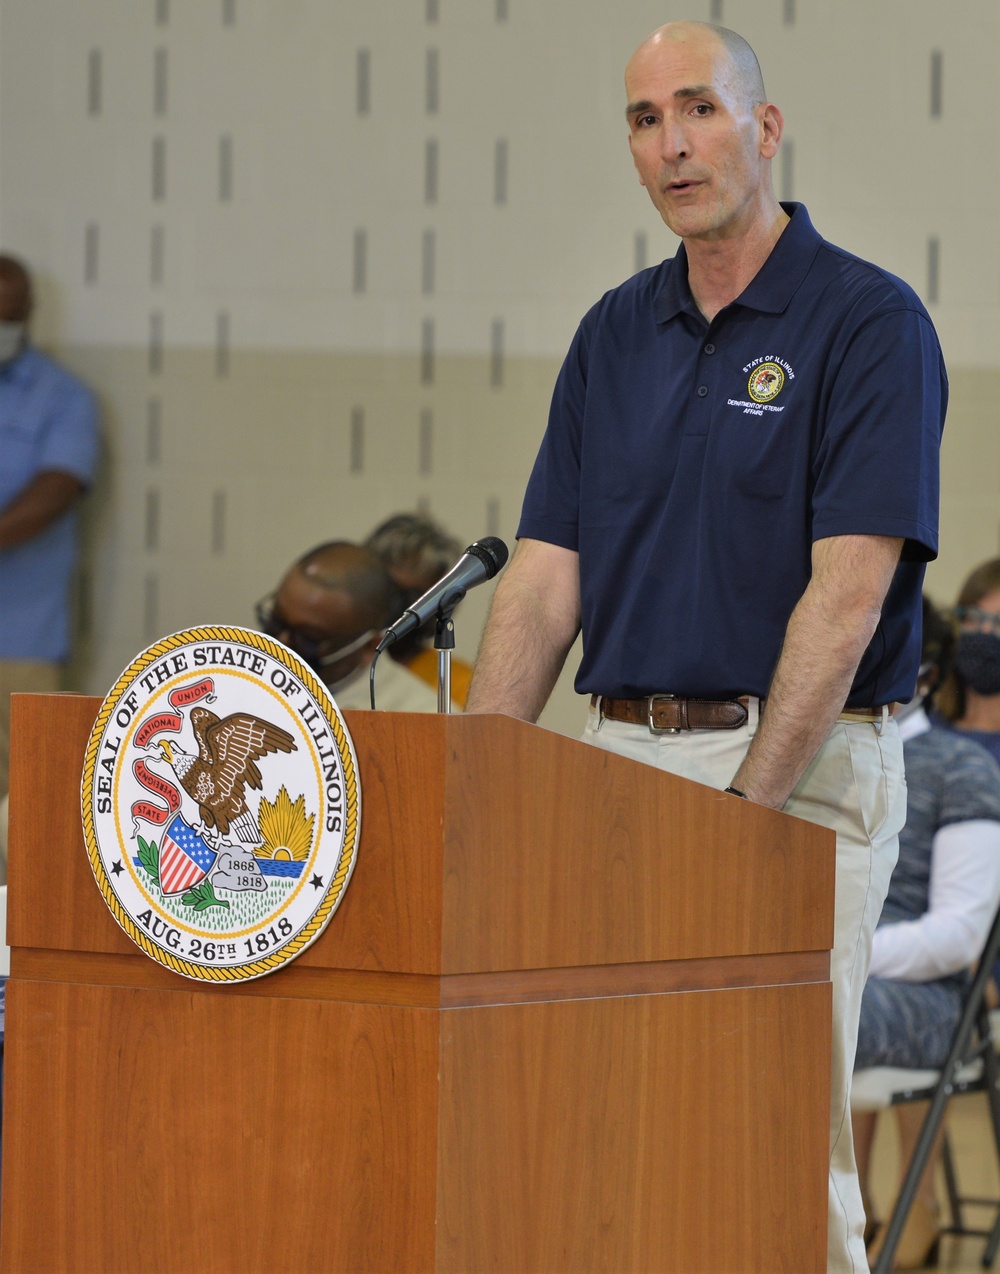 Illinois National Guard's Camp Lincoln Hosts State of Illinois Bill Signings